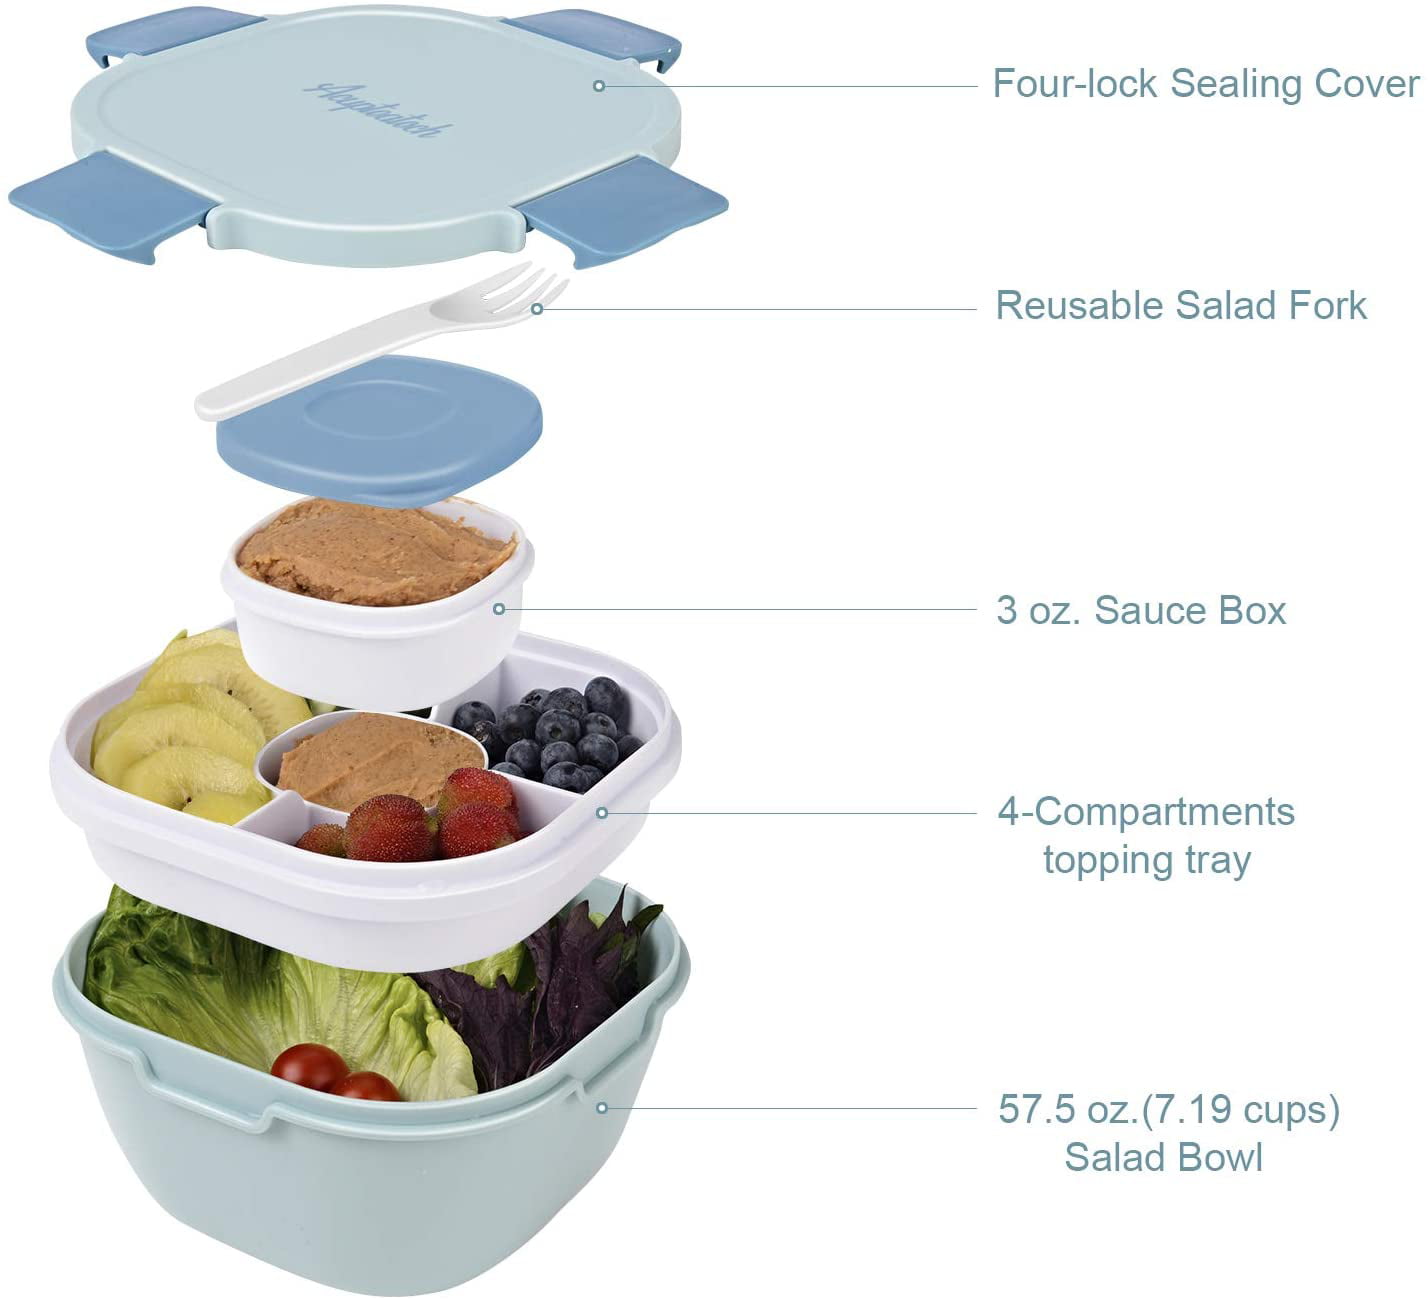 Brand-Umi Salad Bowl Leakproof Lunch Container with Large Capacity Salad Mixing Bowl Blue BPA Free Sauce Container Reusable Cutlery 1700ml 3-Compartment Bento-Style Tray 